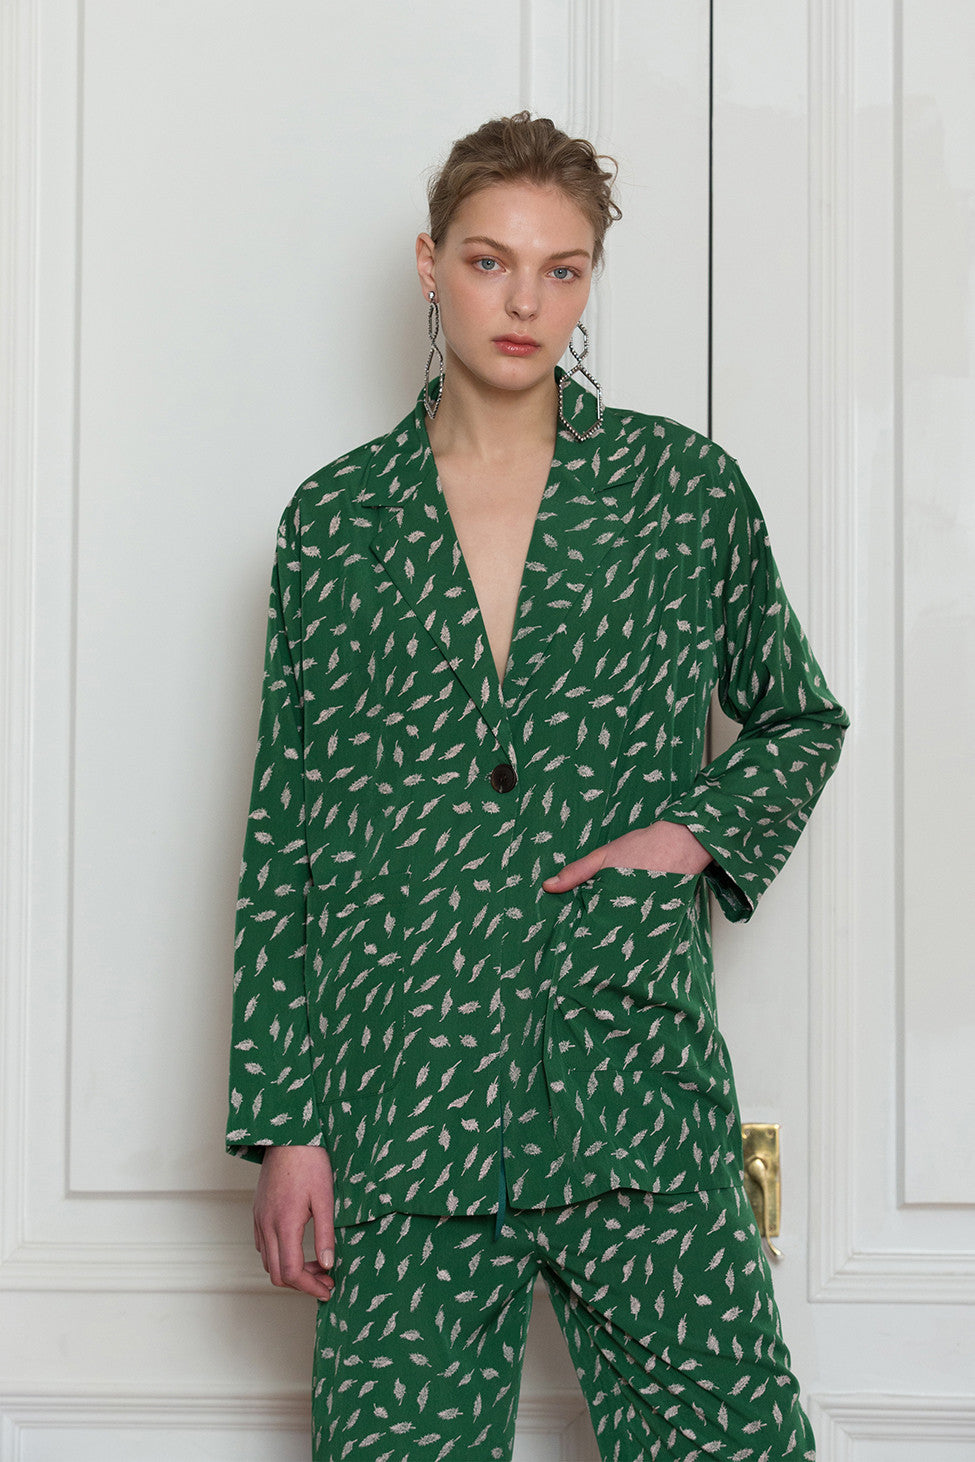 The Colette pajama set in Green feather-pattern. Top features notch collar with sharp lapel, long sleeves, one button placket, left chest pocket and straight hem. Pants feature a gathered elastic waistband and a straight leg. Relaxed fit.